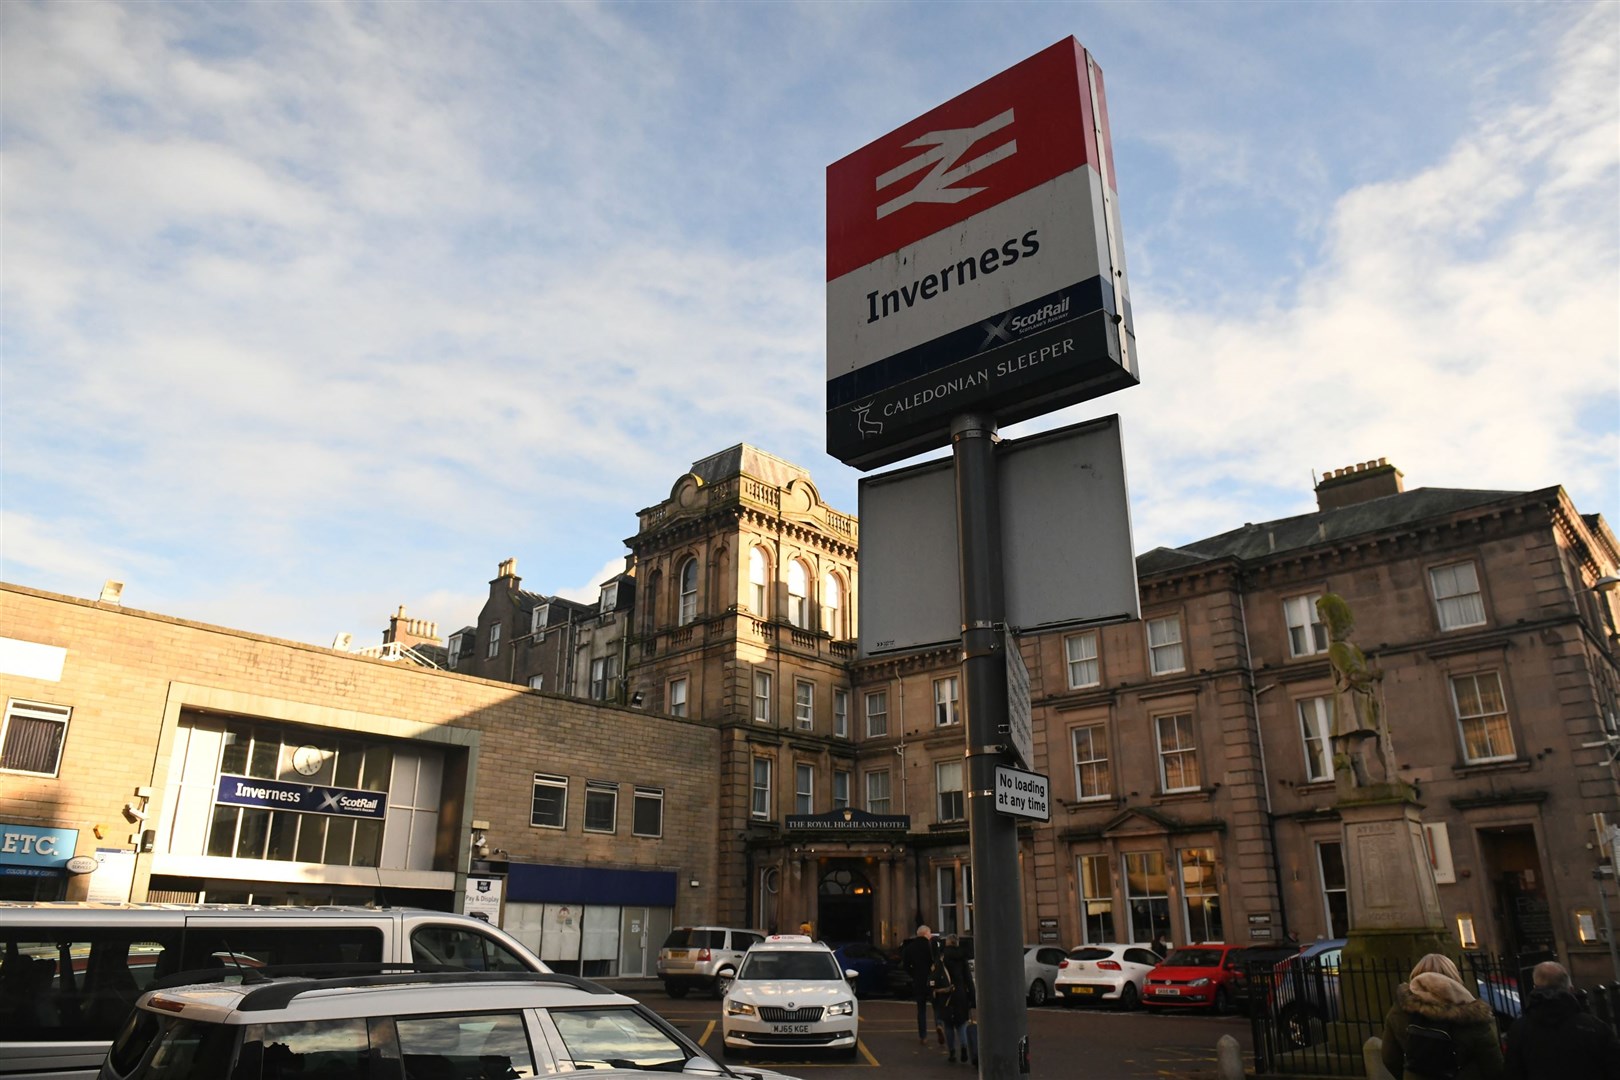 Alternative road transport will be offered to passengers to get them to Edinburgh.